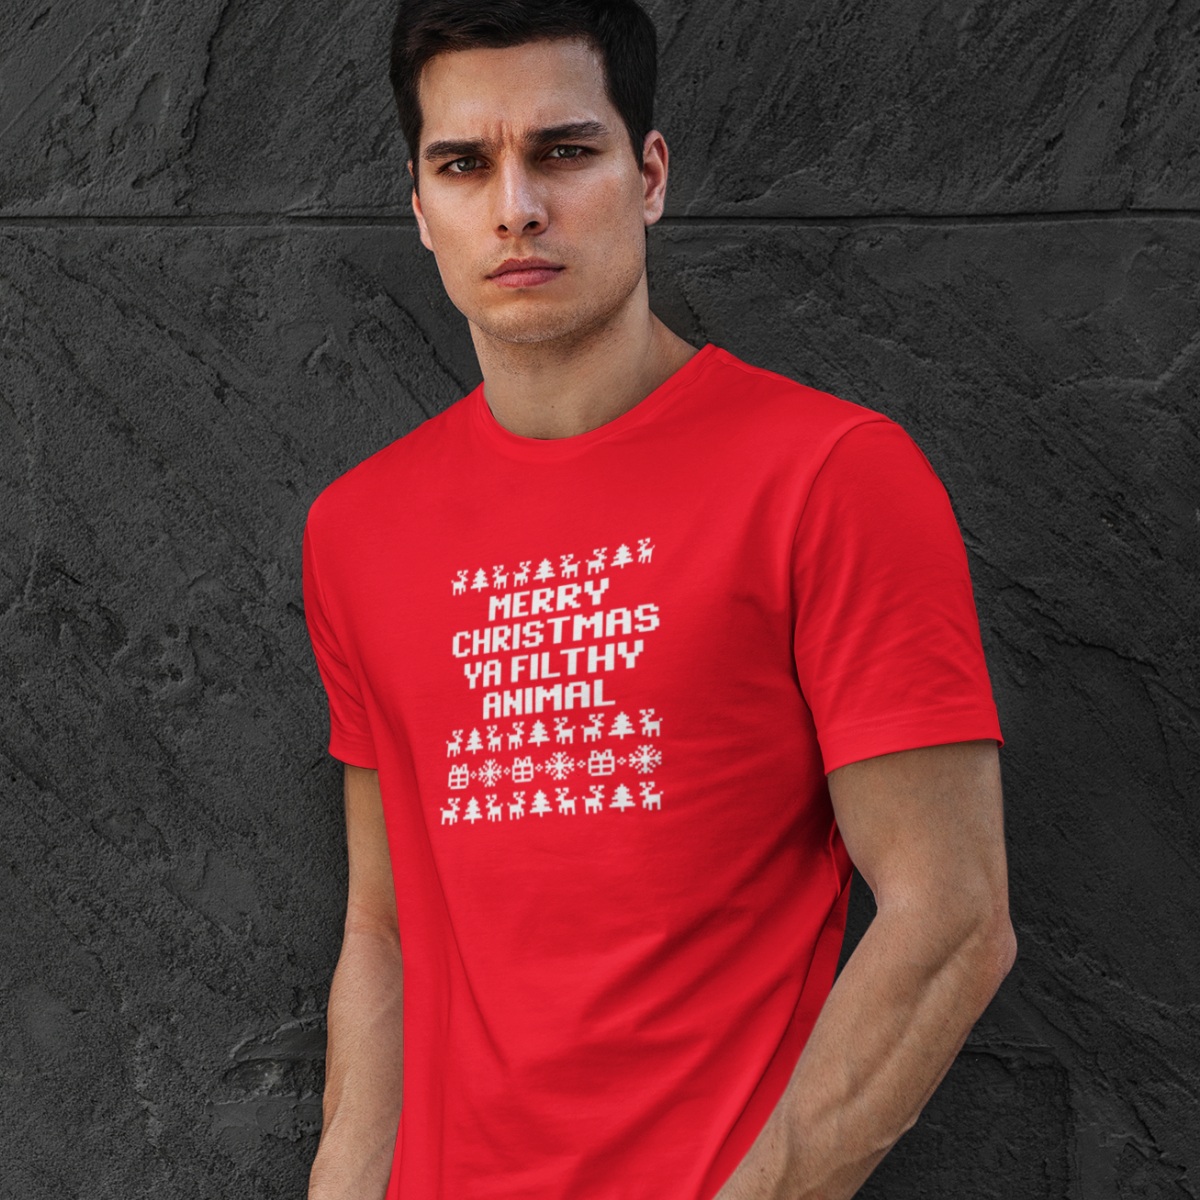 Foute-Kerst-T-shirt-Rood-Ya-Filthy-Animal